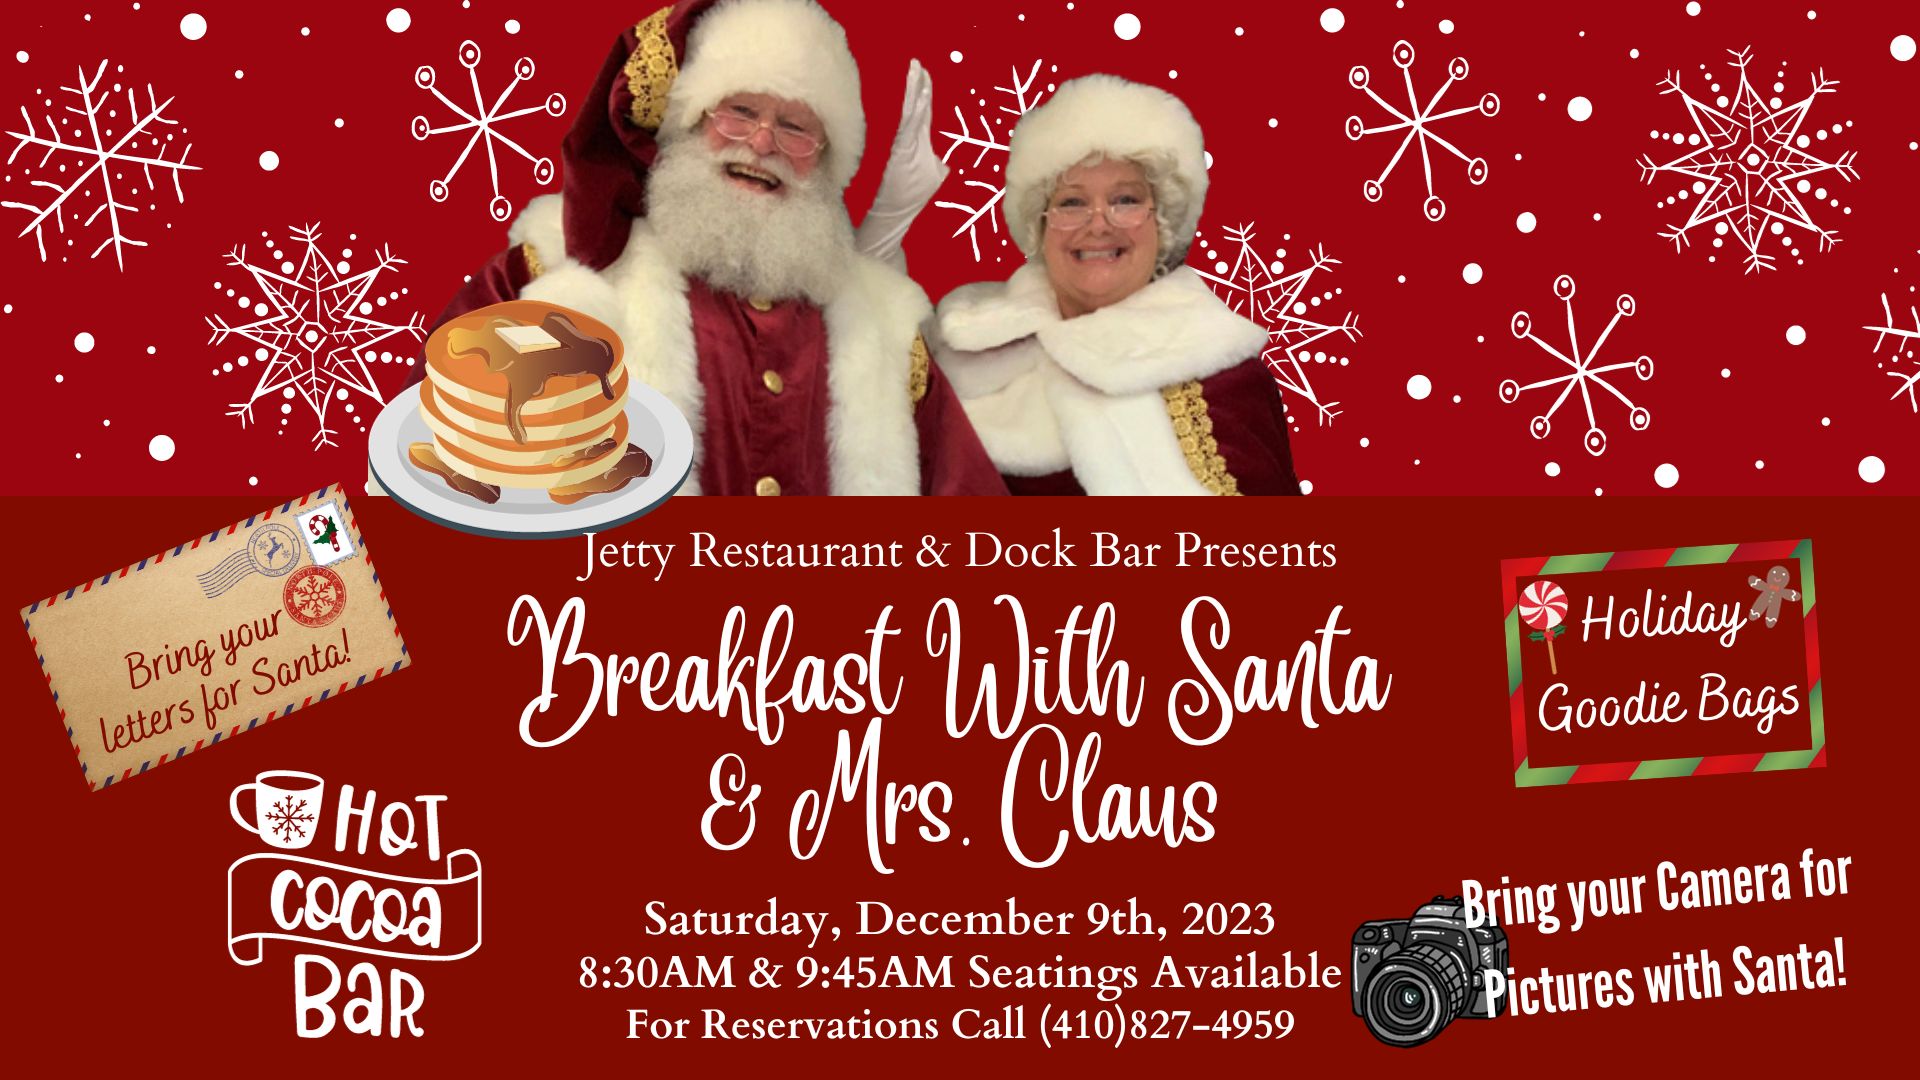 Breakfast with Santa & Mrs. Claus